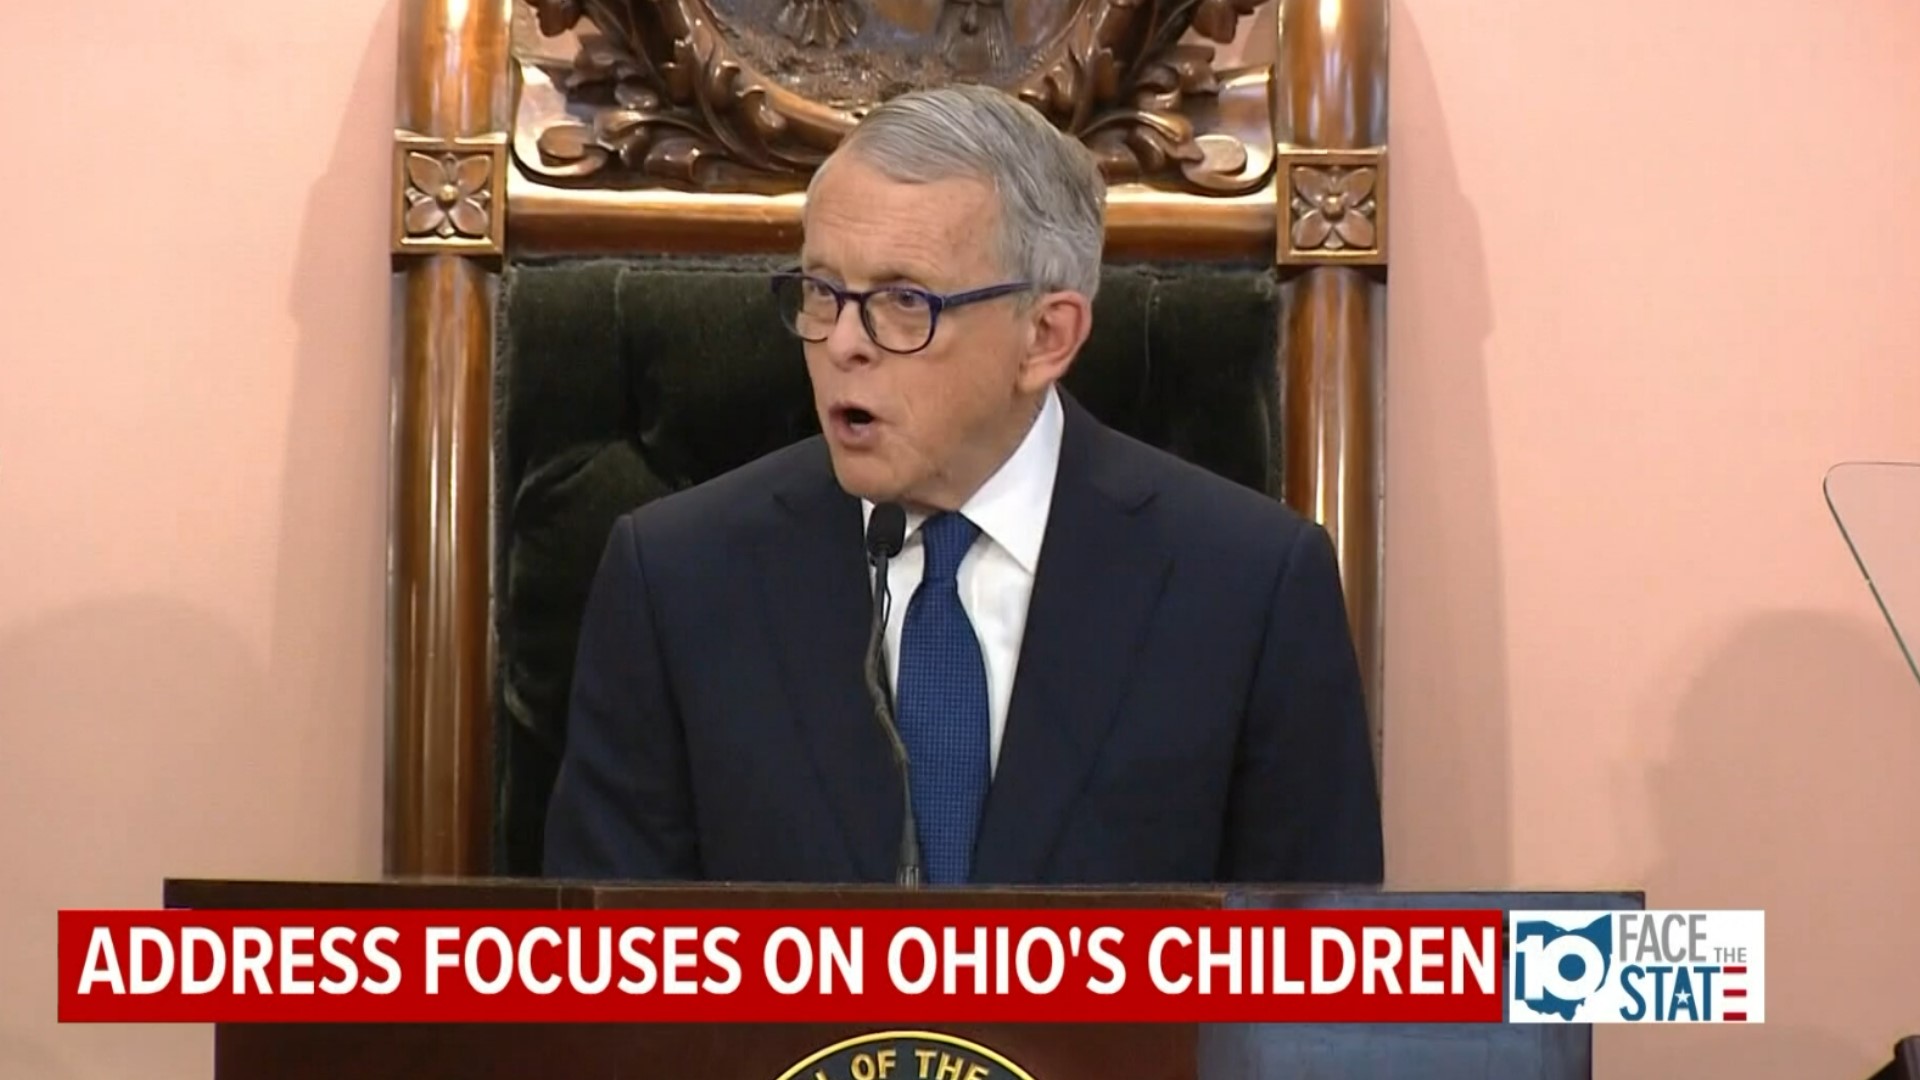 On this week's Face the State, we discuss Gov. DeWine's State of the State address and the Democrat's response.